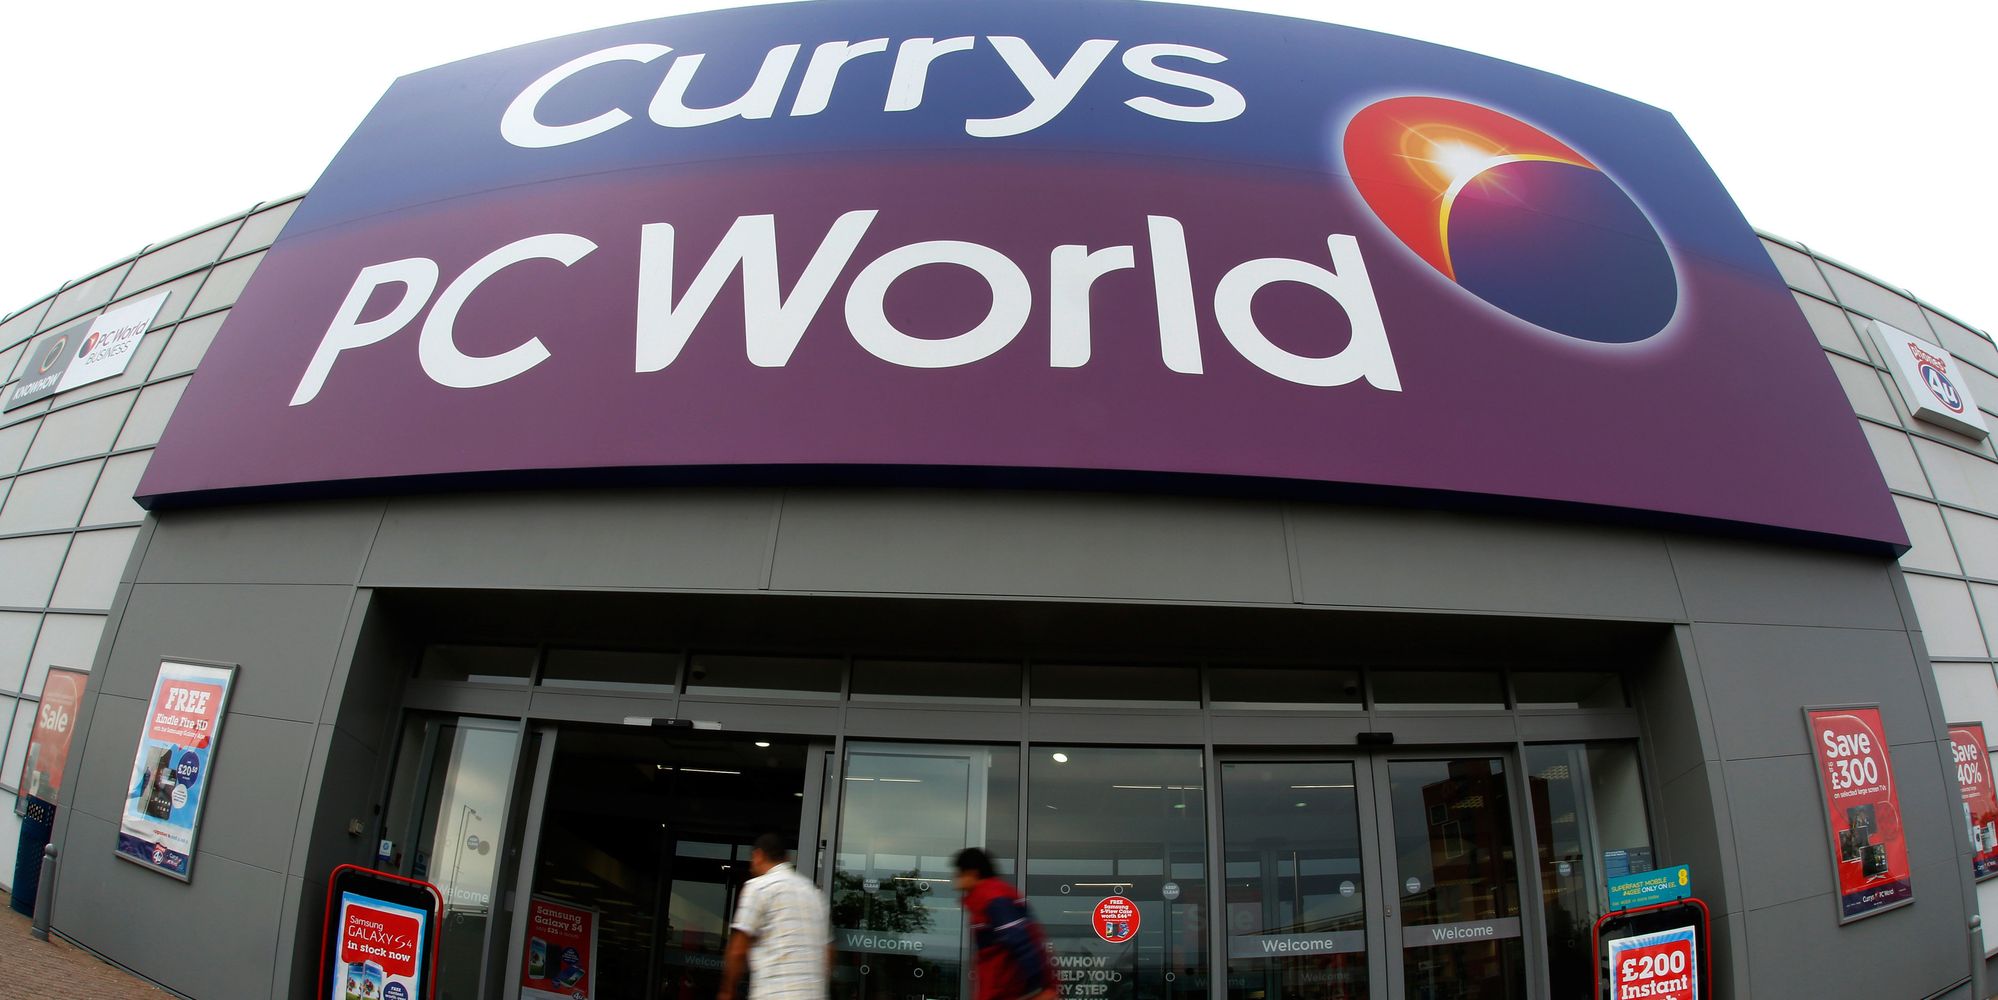 Best Black Friday Currys And PC World Deals On 4K TVs, Laptops, Washing Machines And More ...